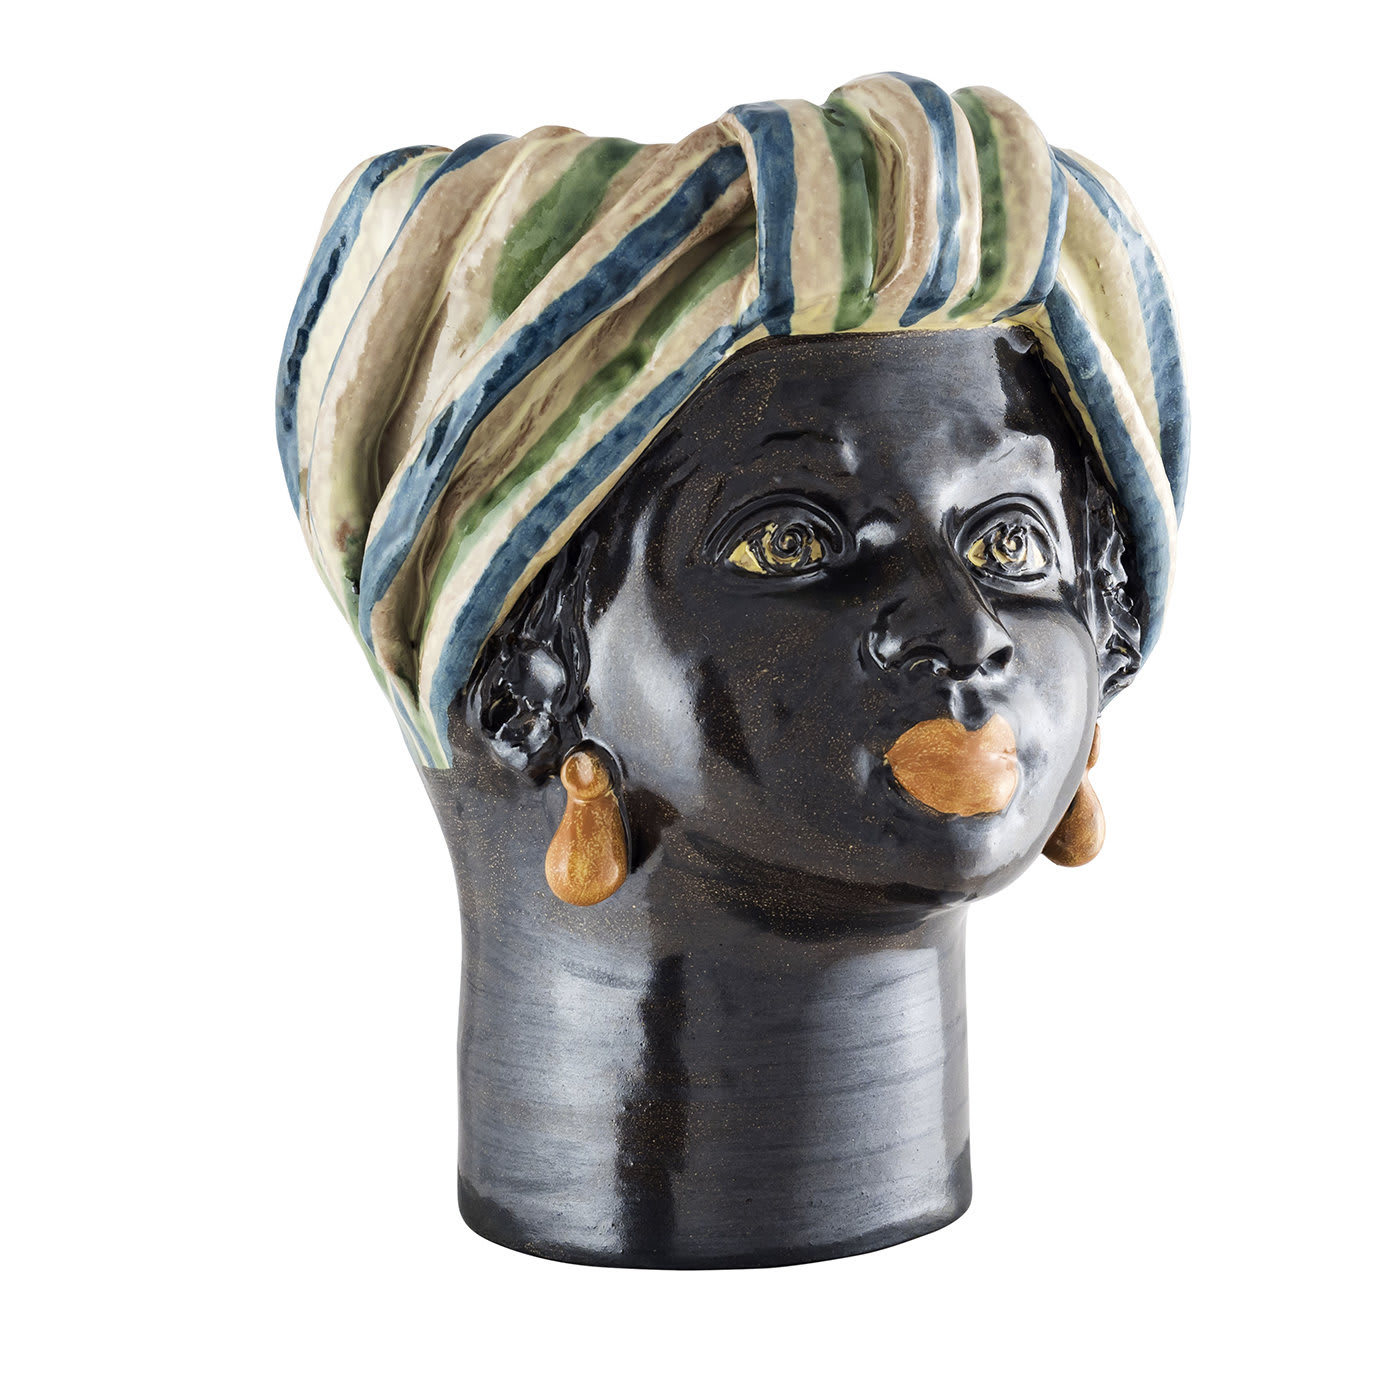 Moor Woman Head with Striped Blue and Green Turban Vase - Alessi Ceramiche